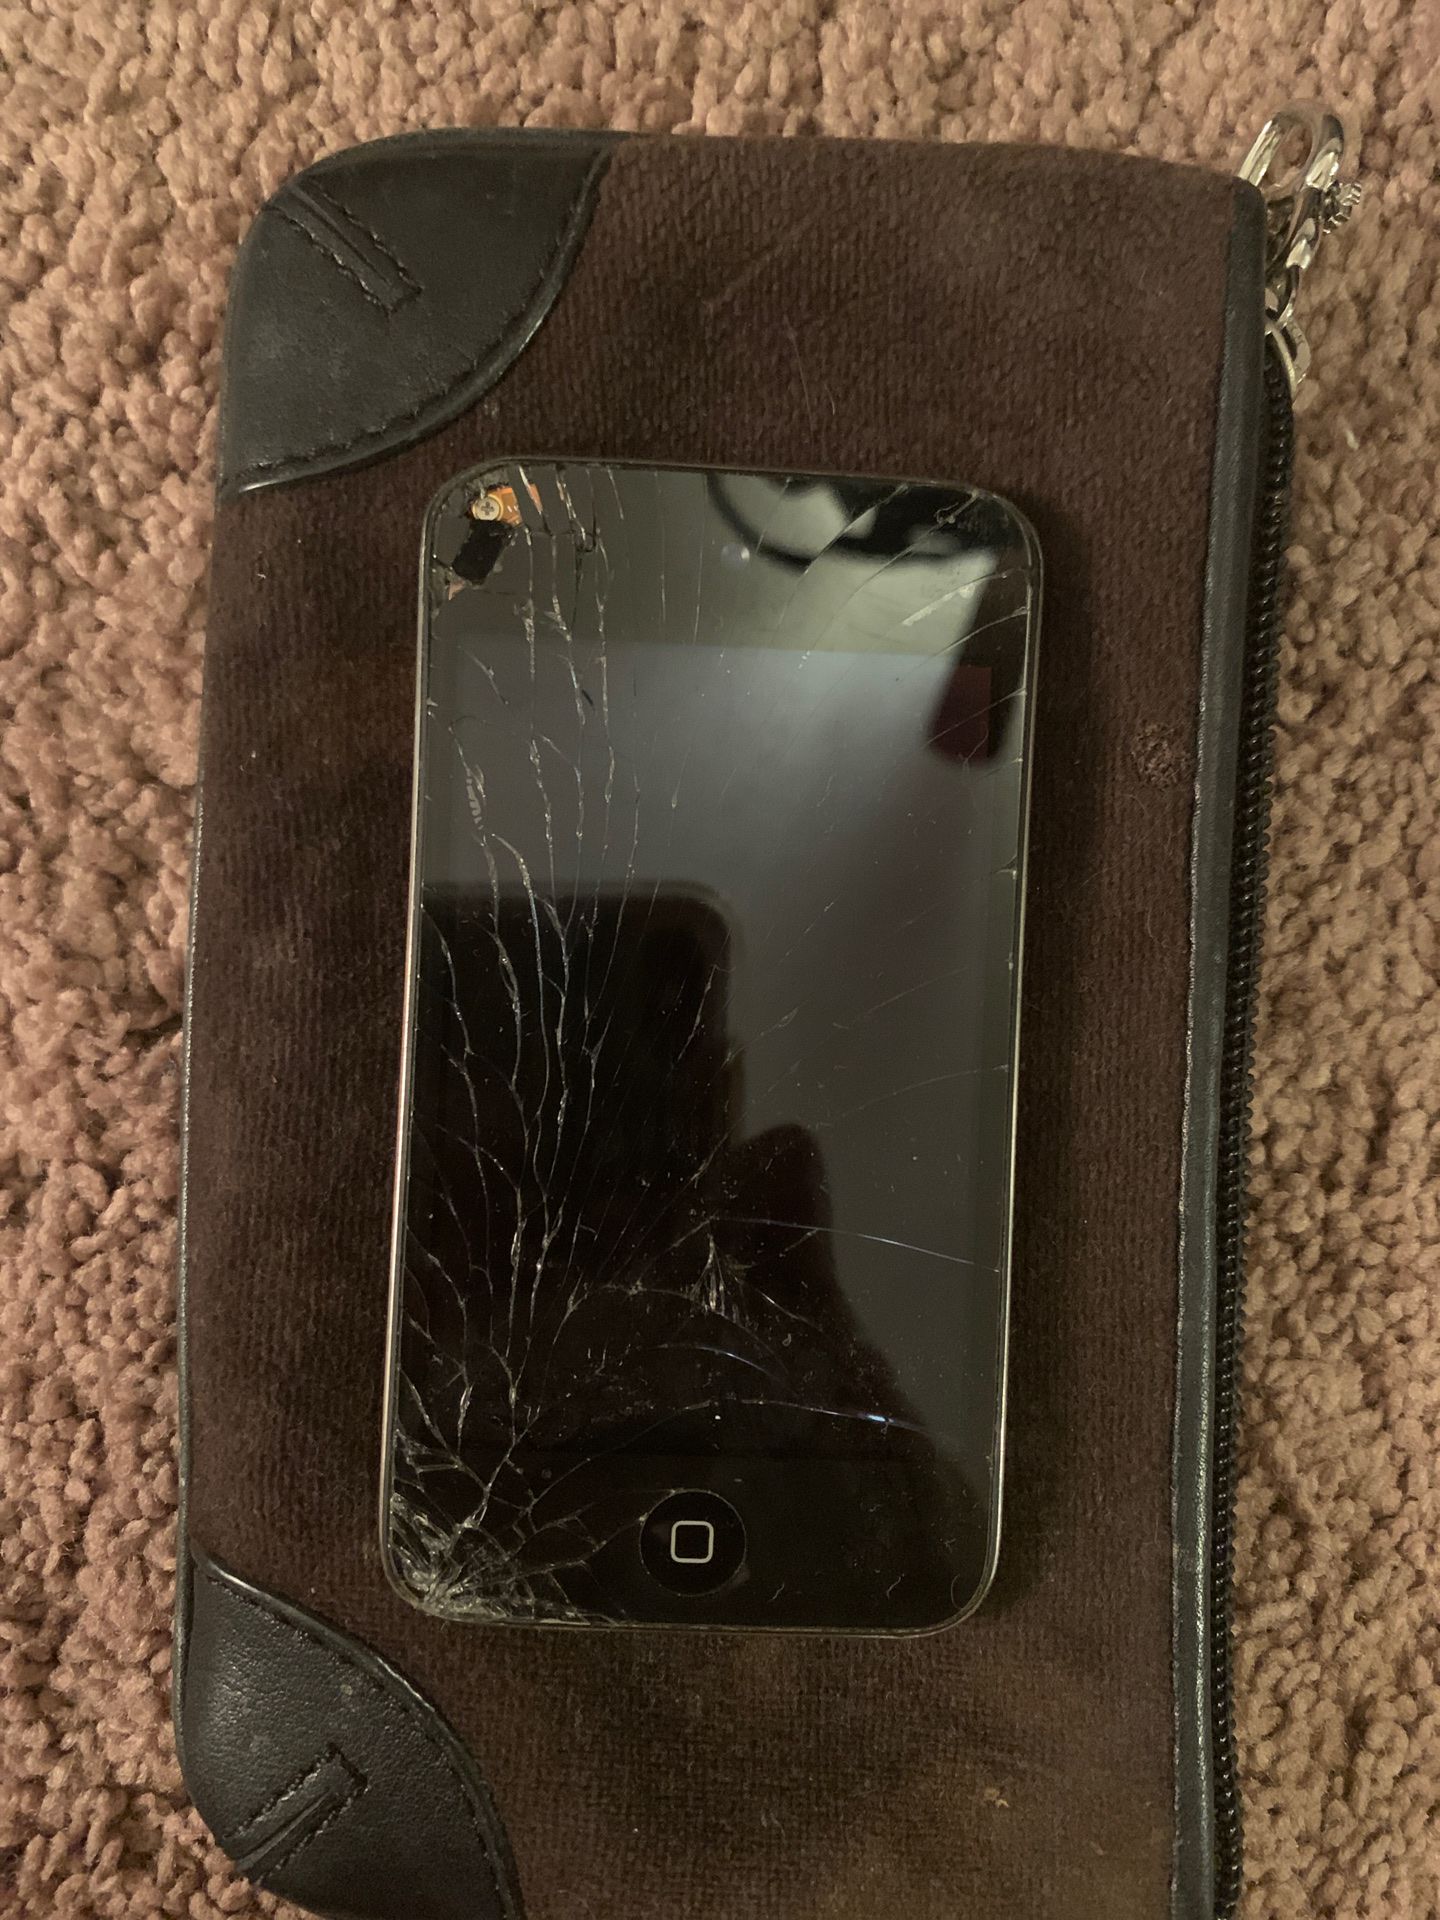 iPod touch 8gig with cracked screen (can be fixed)